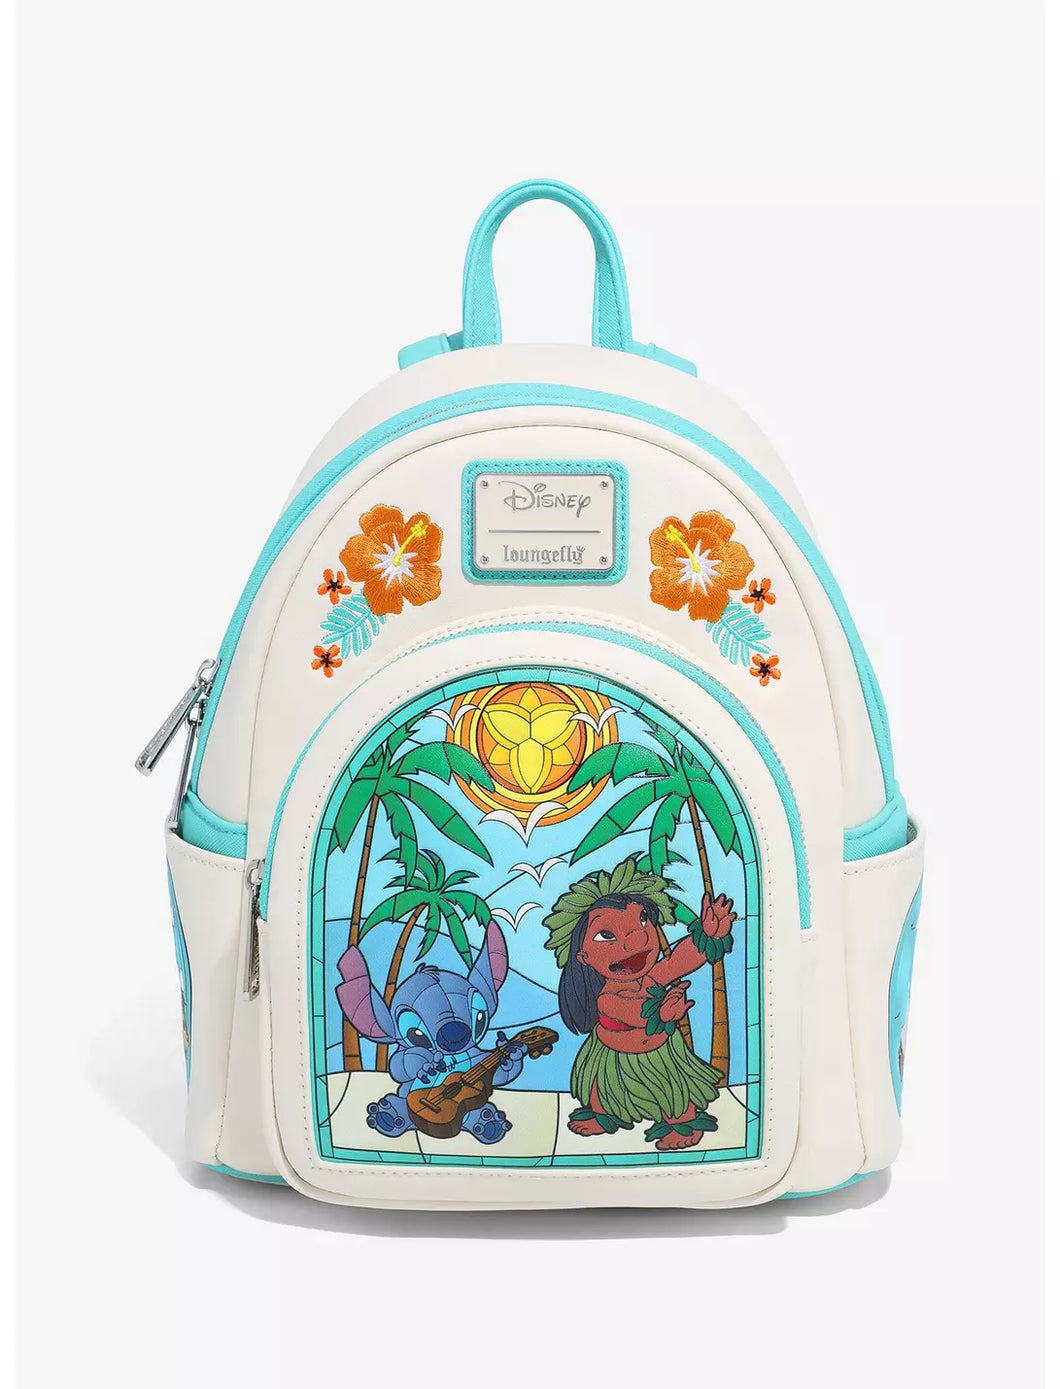 Disney Mini Backpack Lilo & Stitch Stained Glass Loungefly